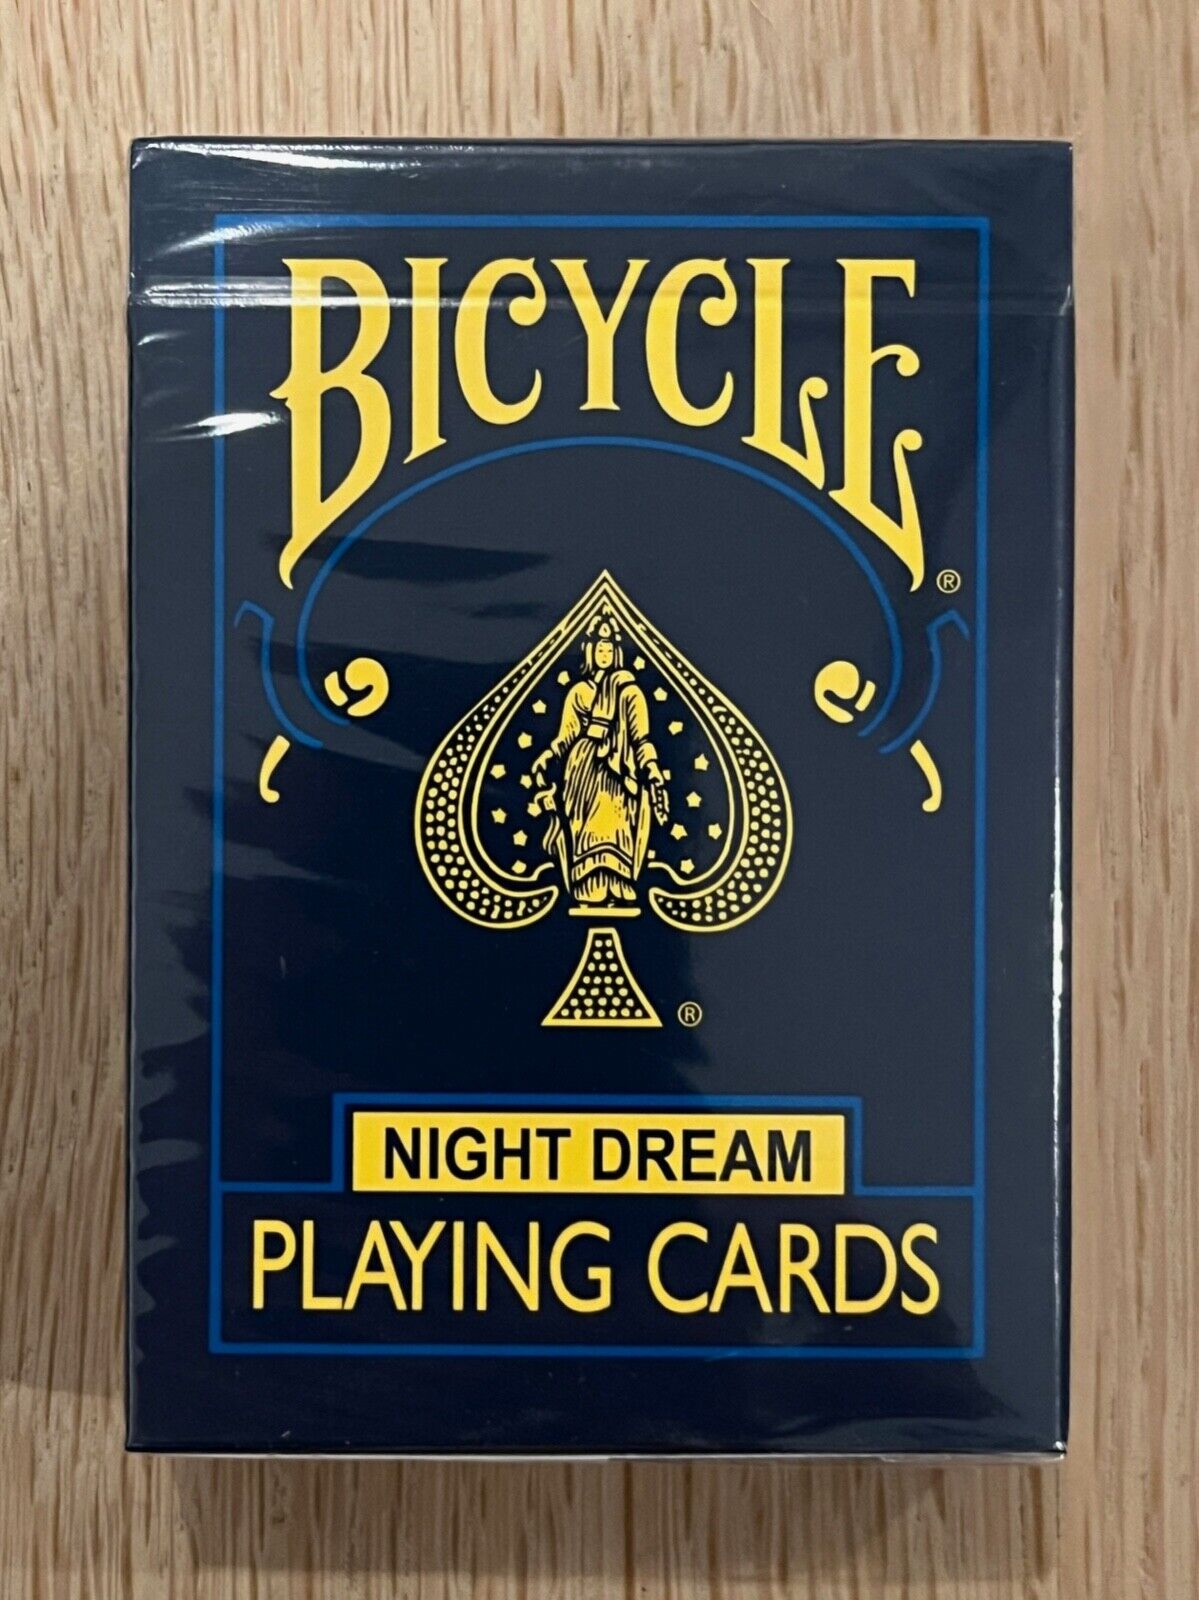 Bicycle Night Dream Playing Cards w/ Carat DS1 Brand New MINT Condition #586